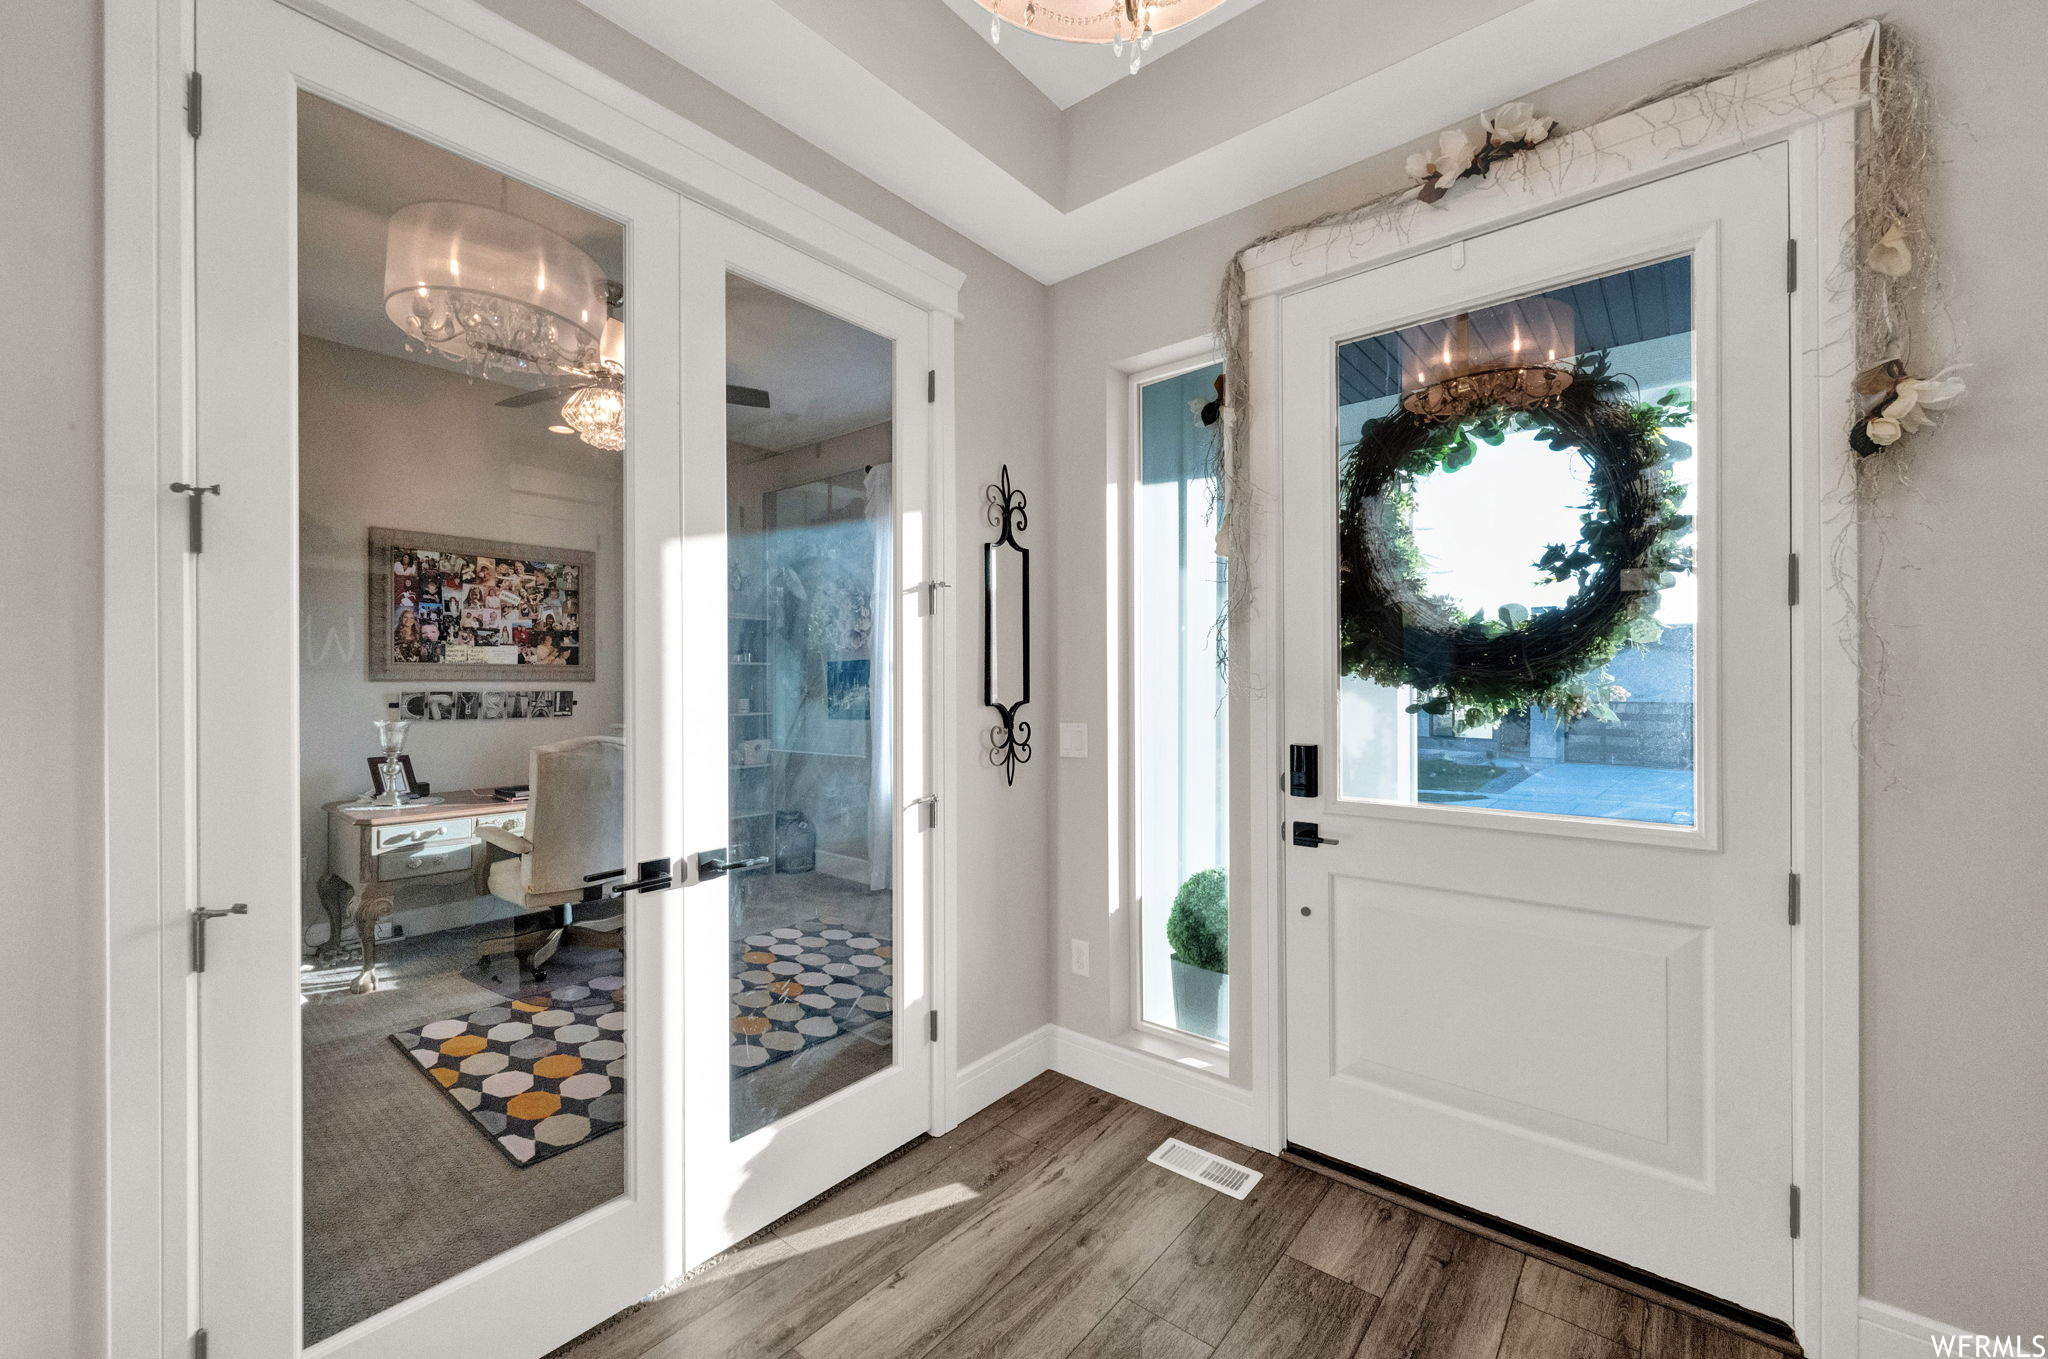 Entrance foyer featuring ceiling fan with notable chandelier and hardwood floors